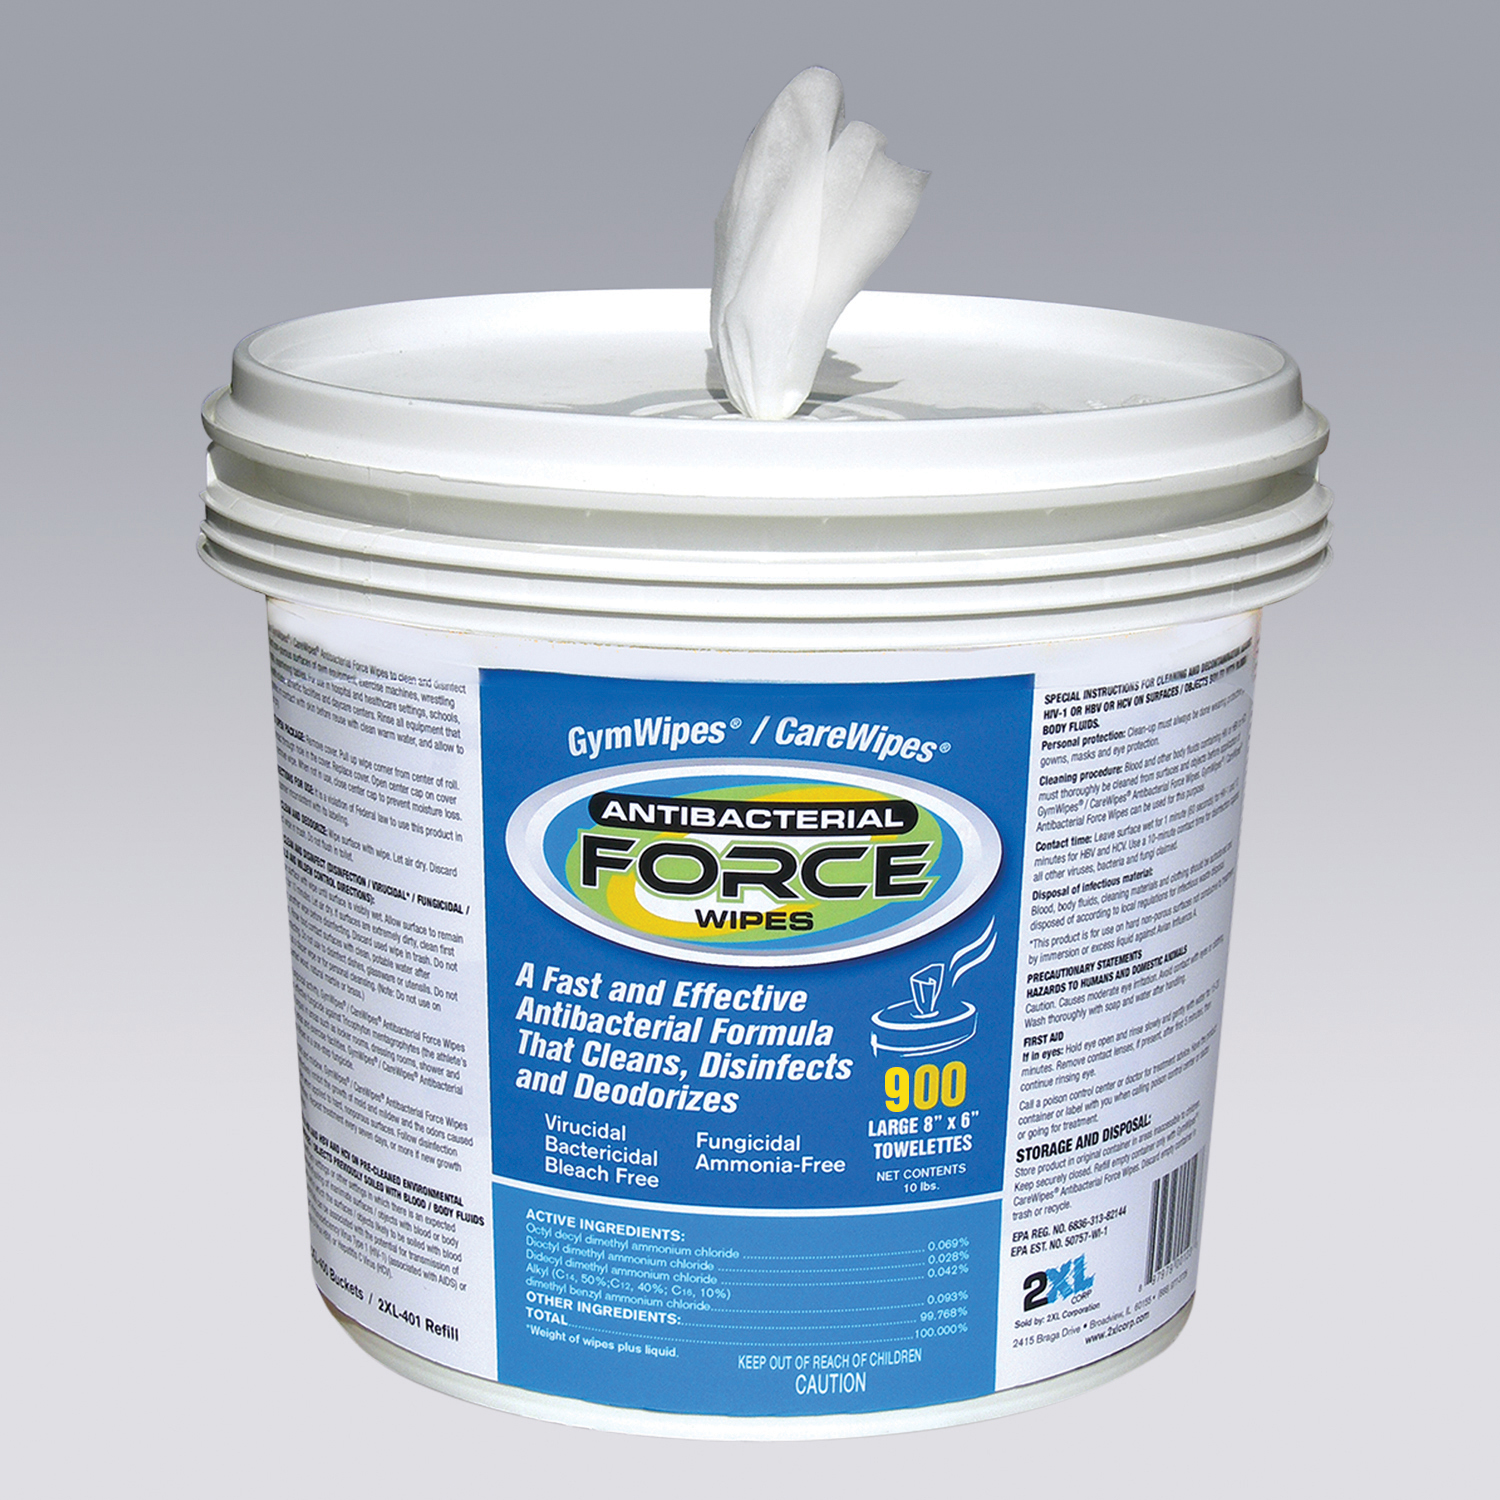 Gym Wipes/Care Wipes Antibacterial Force Bucket